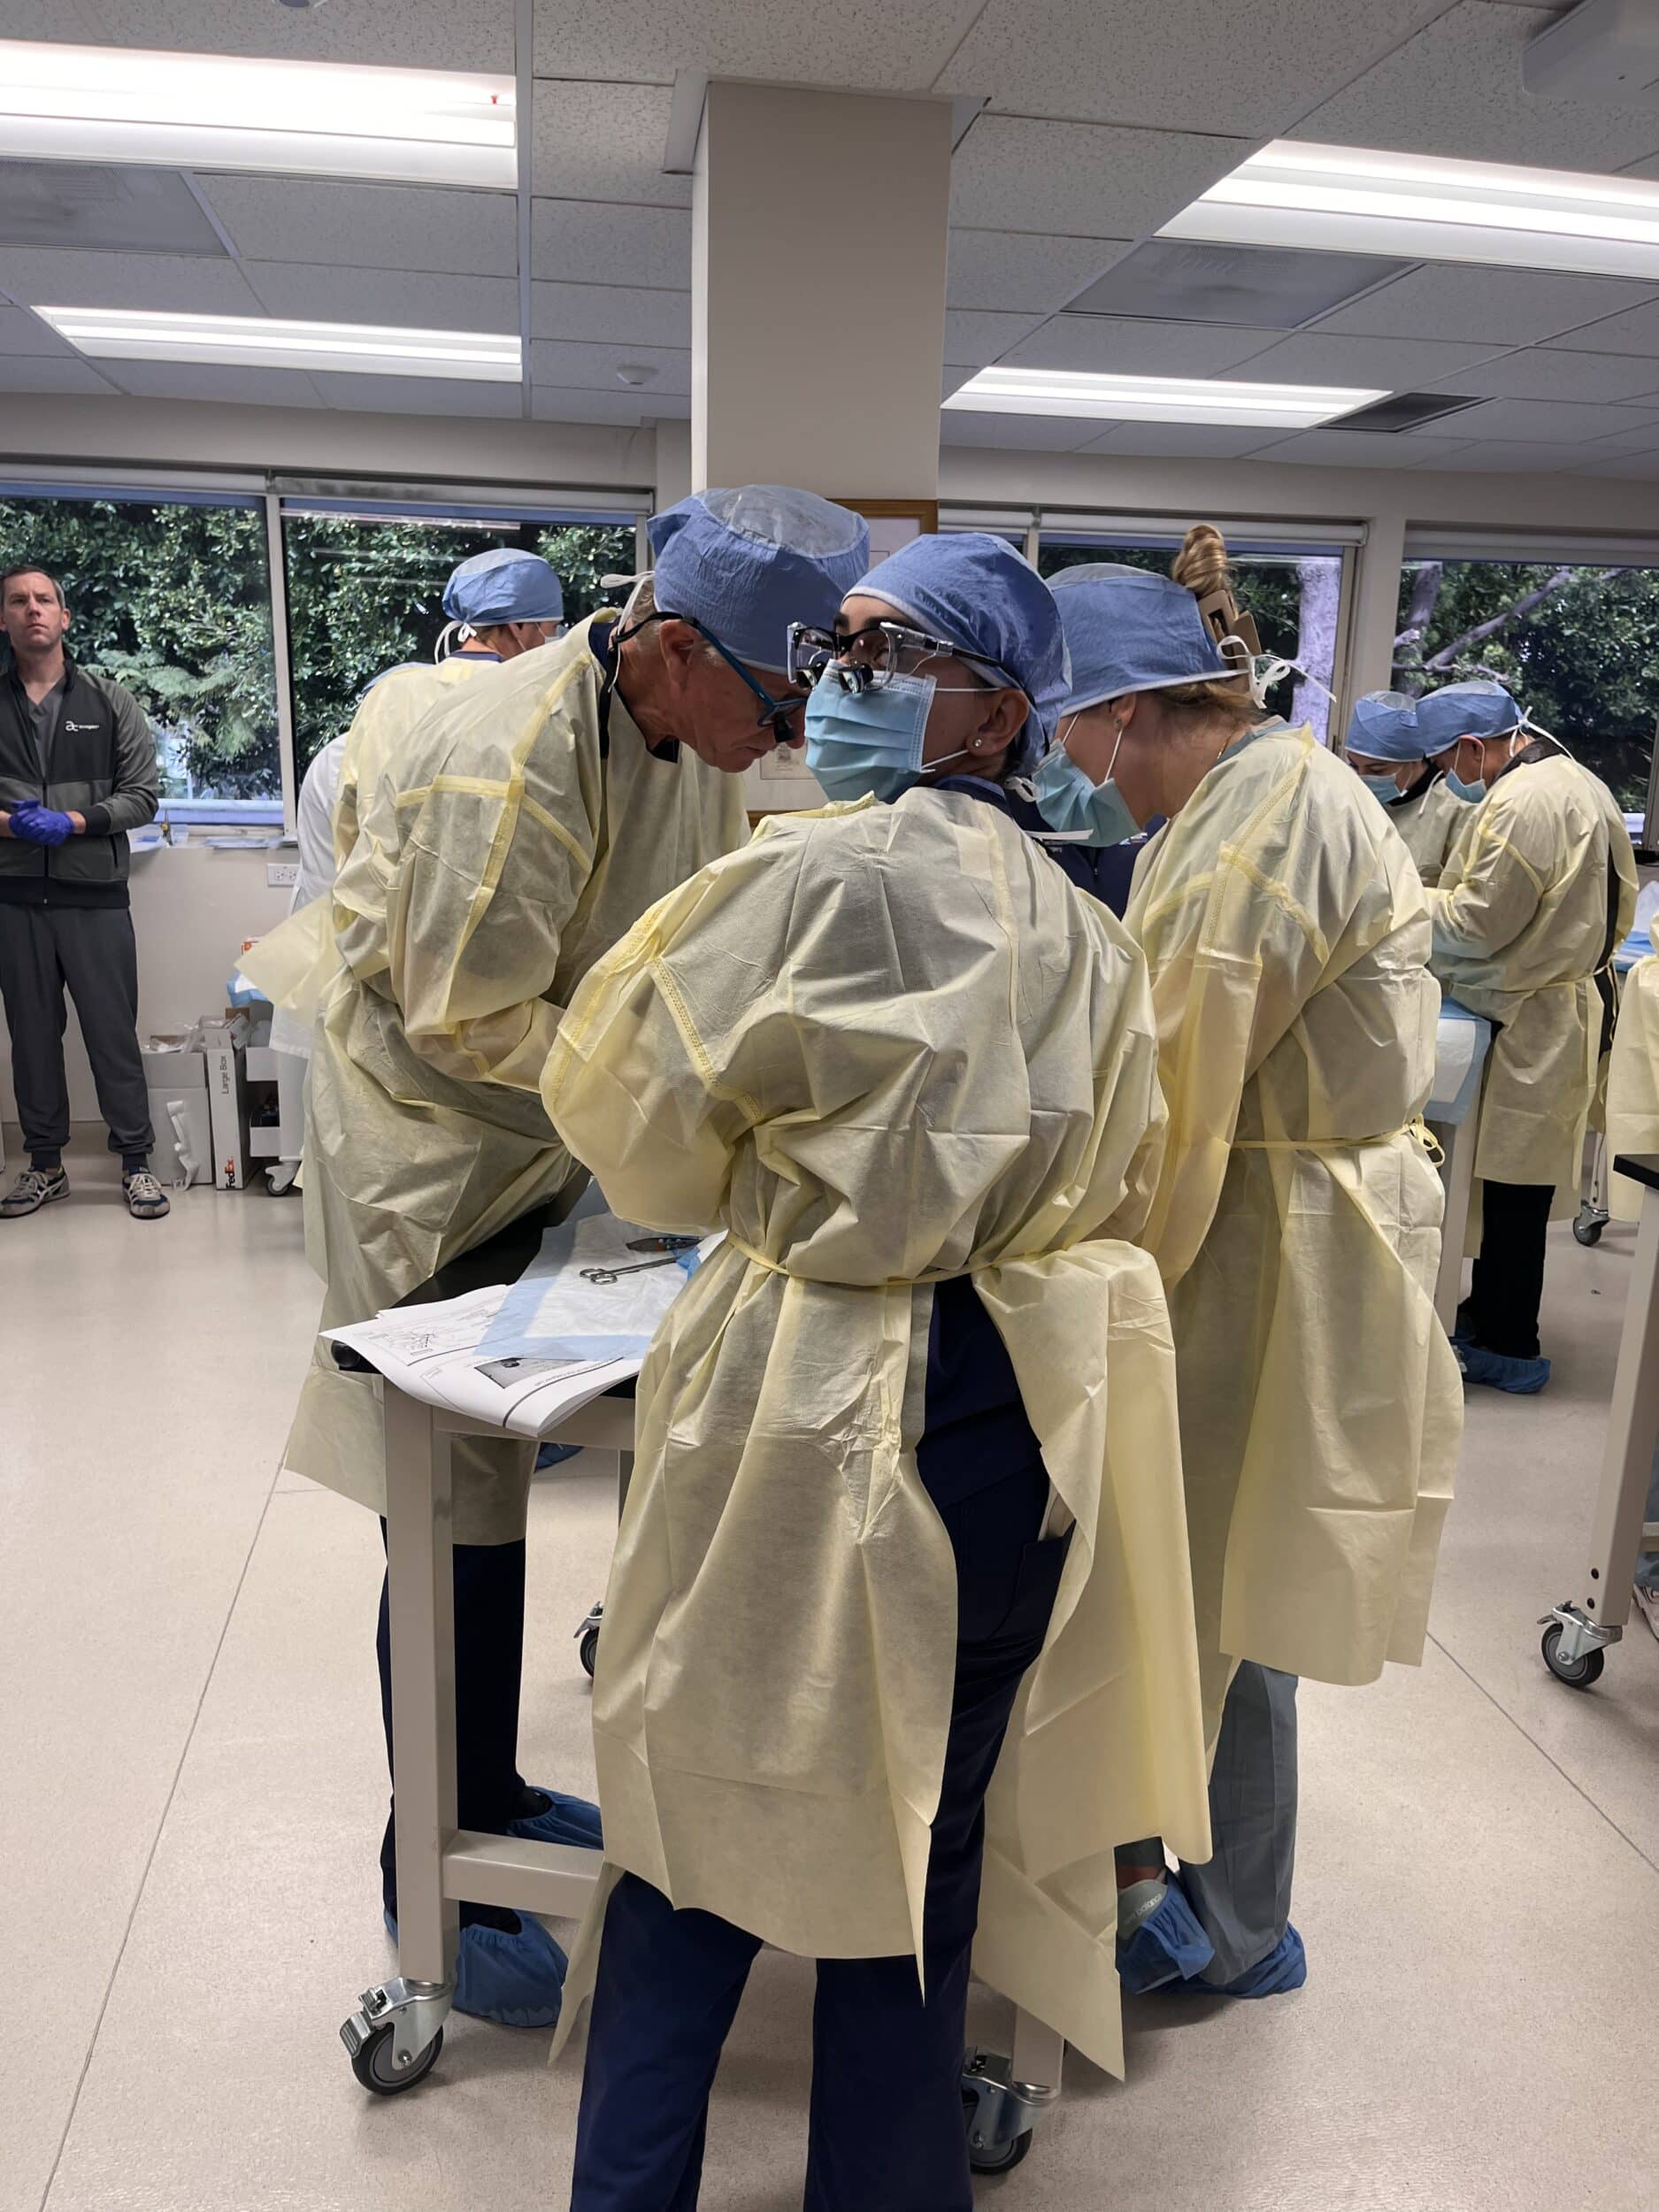 Attendees practicing their surgical skills at the cadaver lab.